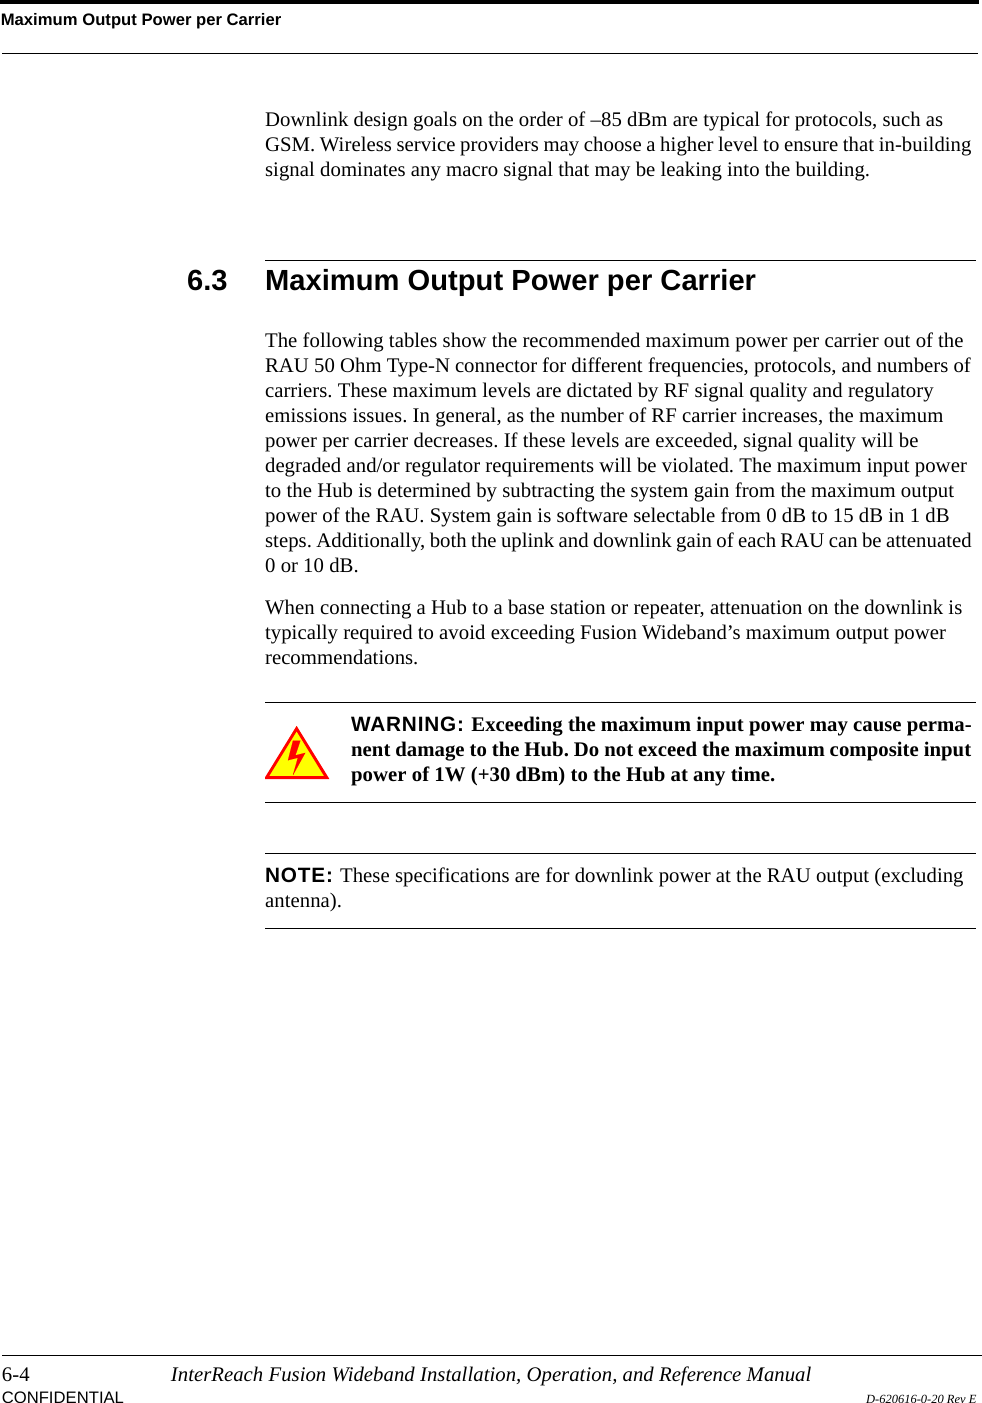 Maximum Output Power per Carrier6-4 InterReach Fusion Wideband Installation, Operation, and Reference ManualCONFIDENTIAL D-620616-0-20 Rev EDownlink design goals on the order of –85 dBm are typical for protocols, such as GSM. Wireless service providers may choose a higher level to ensure that in-building signal dominates any macro signal that may be leaking into the building.6.3 Maximum Output Power per CarrierThe following tables show the recommended maximum power per carrier out of the RAU 50 Ohm Type-N connector for different frequencies, protocols, and numbers of carriers. These maximum levels are dictated by RF signal quality and regulatory emissions issues. In general, as the number of RF carrier increases, the maximum power per carrier decreases. If these levels are exceeded, signal quality will be degraded and/or regulator requirements will be violated. The maximum input power to the Hub is determined by subtracting the system gain from the maximum output power of the RAU. System gain is software selectable from 0 dB to 15 dB in 1 dB steps. Additionally, both the uplink and downlink gain of each RAU can be attenuated 0 or 10 dB.When connecting a Hub to a base station or repeater, attenuation on the downlink is typically required to avoid exceeding Fusion Wideband’s maximum output power recommendations.WARNING: Exceeding the maximum input power may cause perma-nent damage to the Hub. Do not exceed the maximum composite input power of 1W (+30 dBm) to the Hub at any time.NOTE: These specifications are for downlink power at the RAU output (excluding antenna).